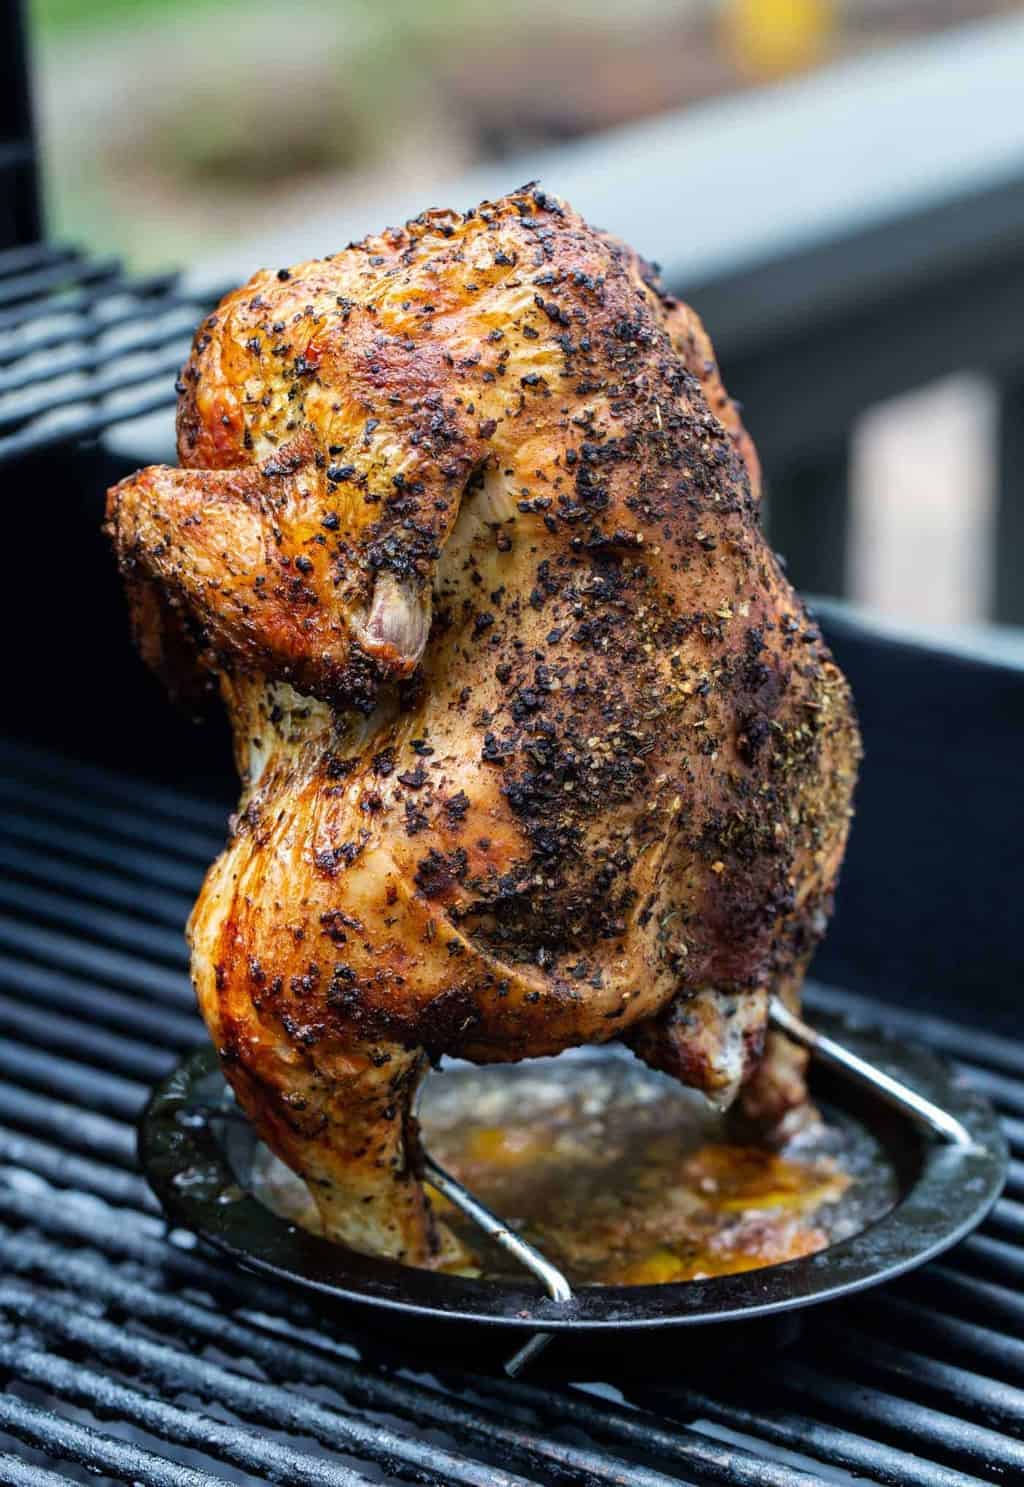 Grilled Whole Chicken recipe (for both 